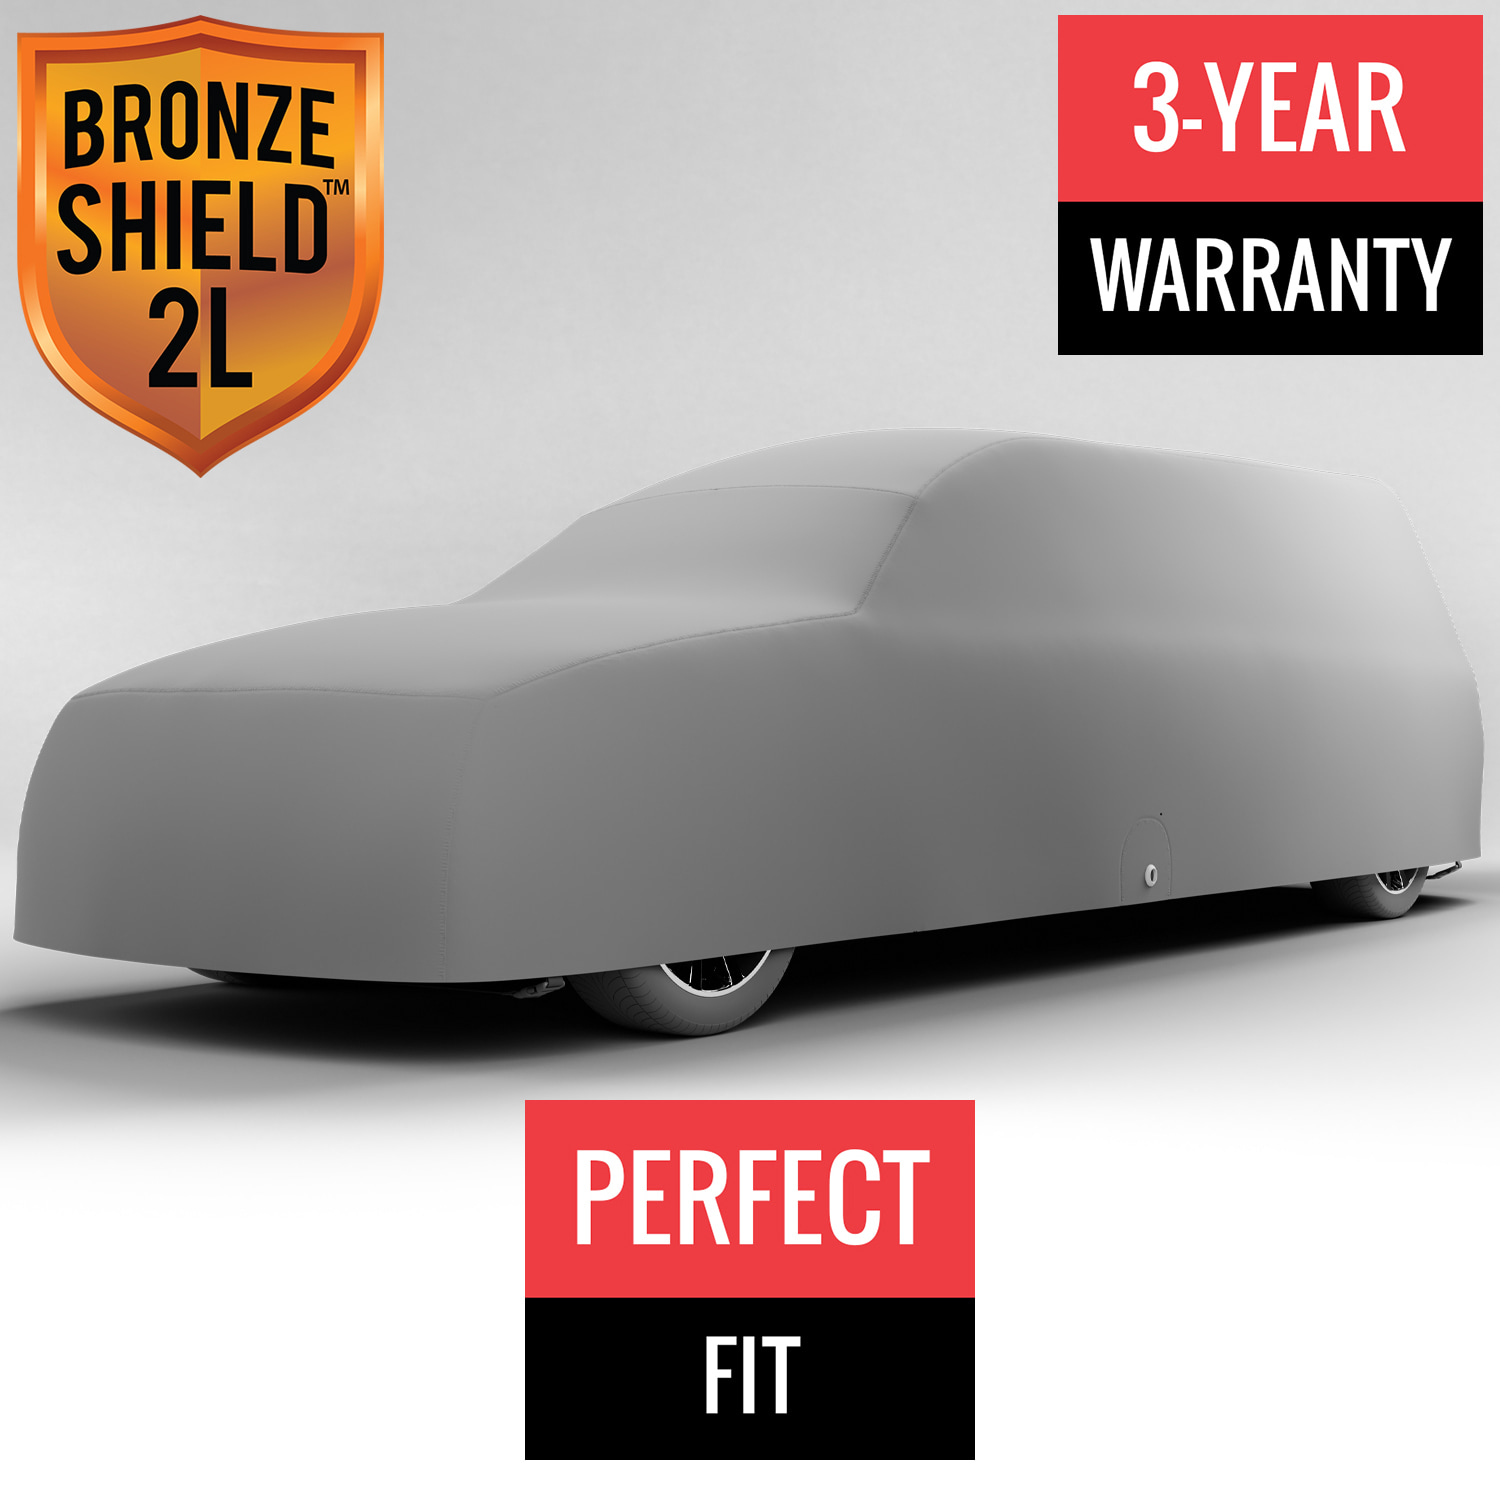 Bronze Shield 2L - Cover for Hearse Up to 22 Feet Long